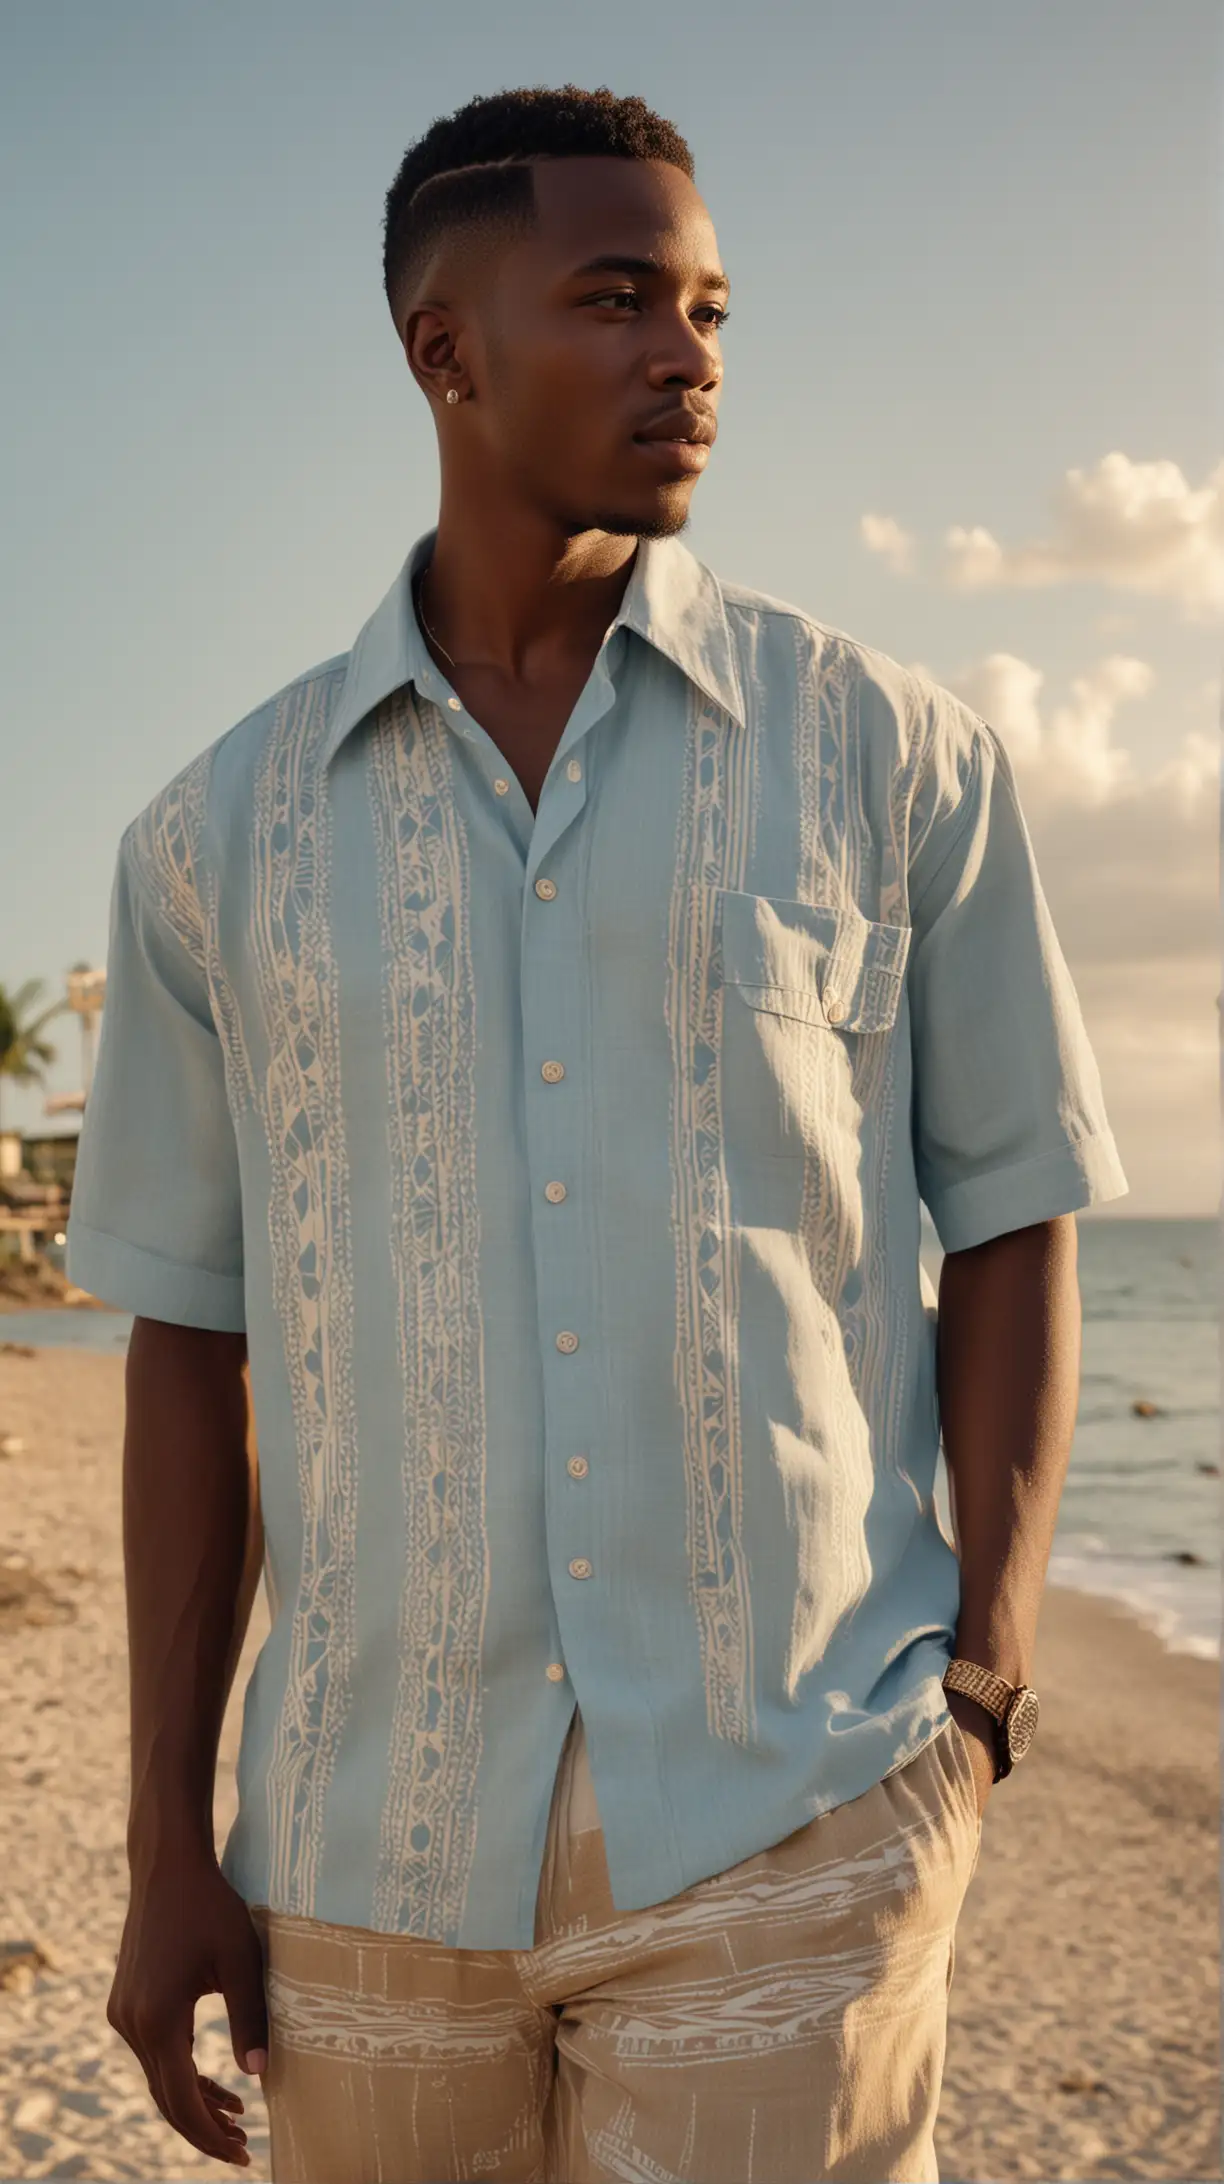 Young African Man in Stylish Cubano Shirt Gazing into the Distance in Negril